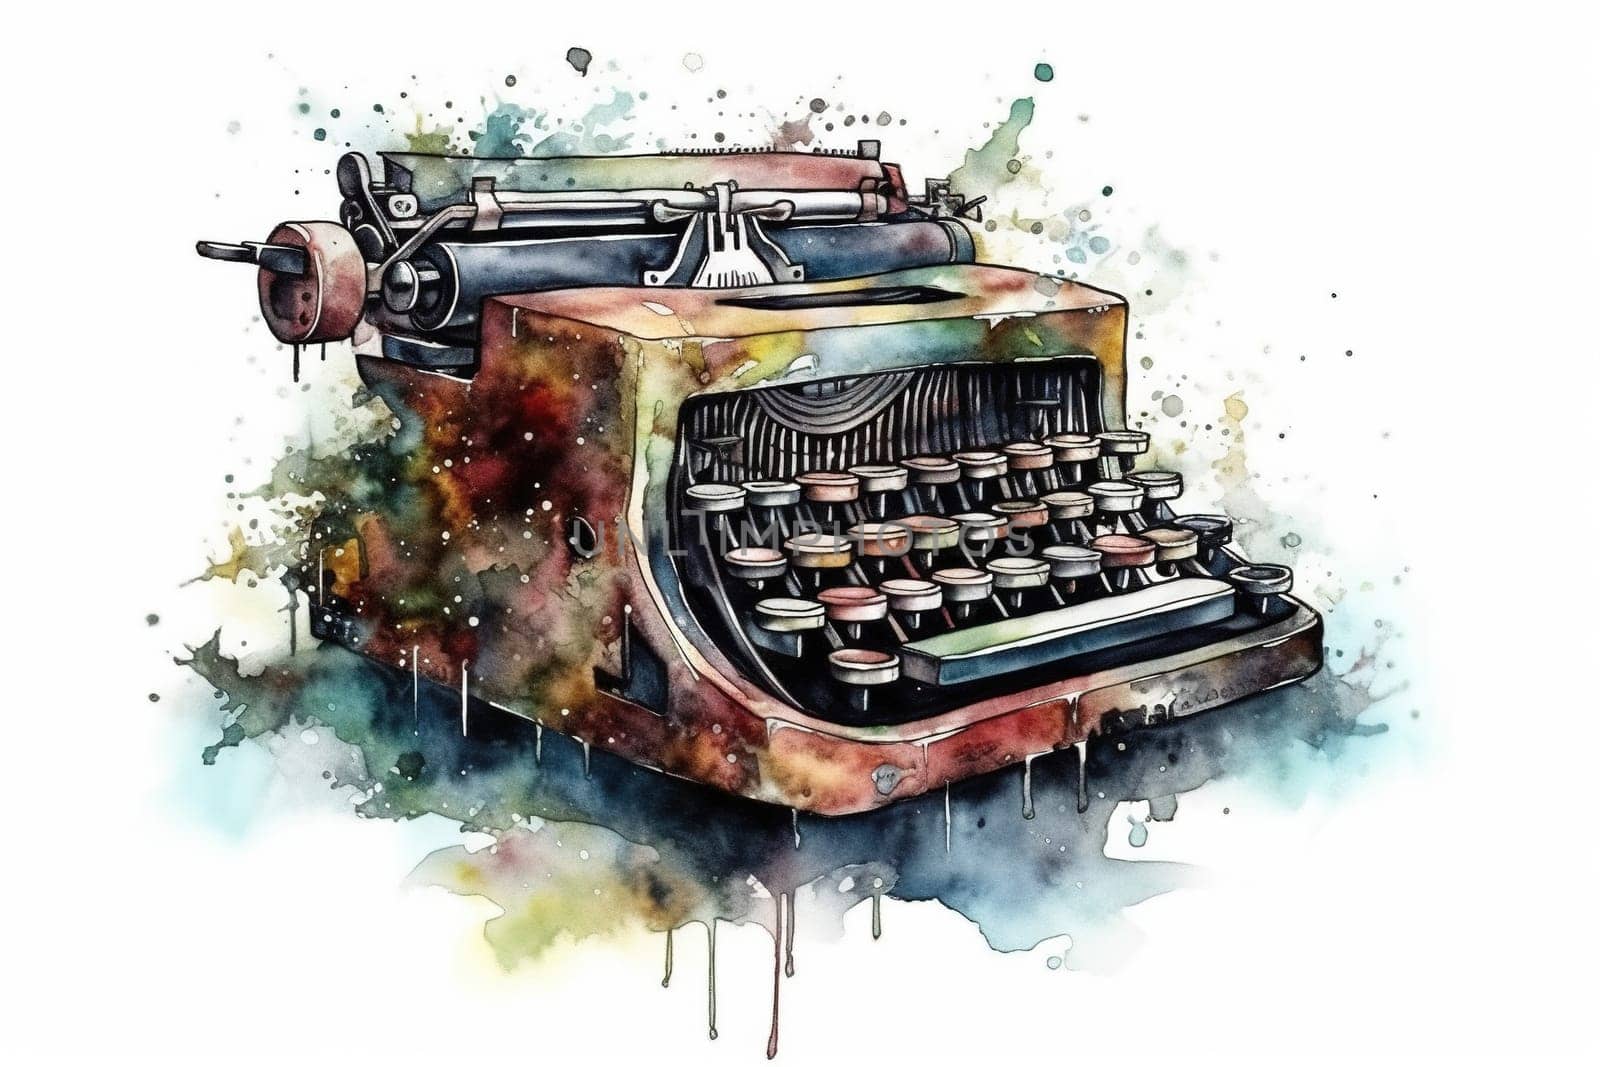 Watercolor Illustration Of Retro Typewriter On A White Background by GekaSkr